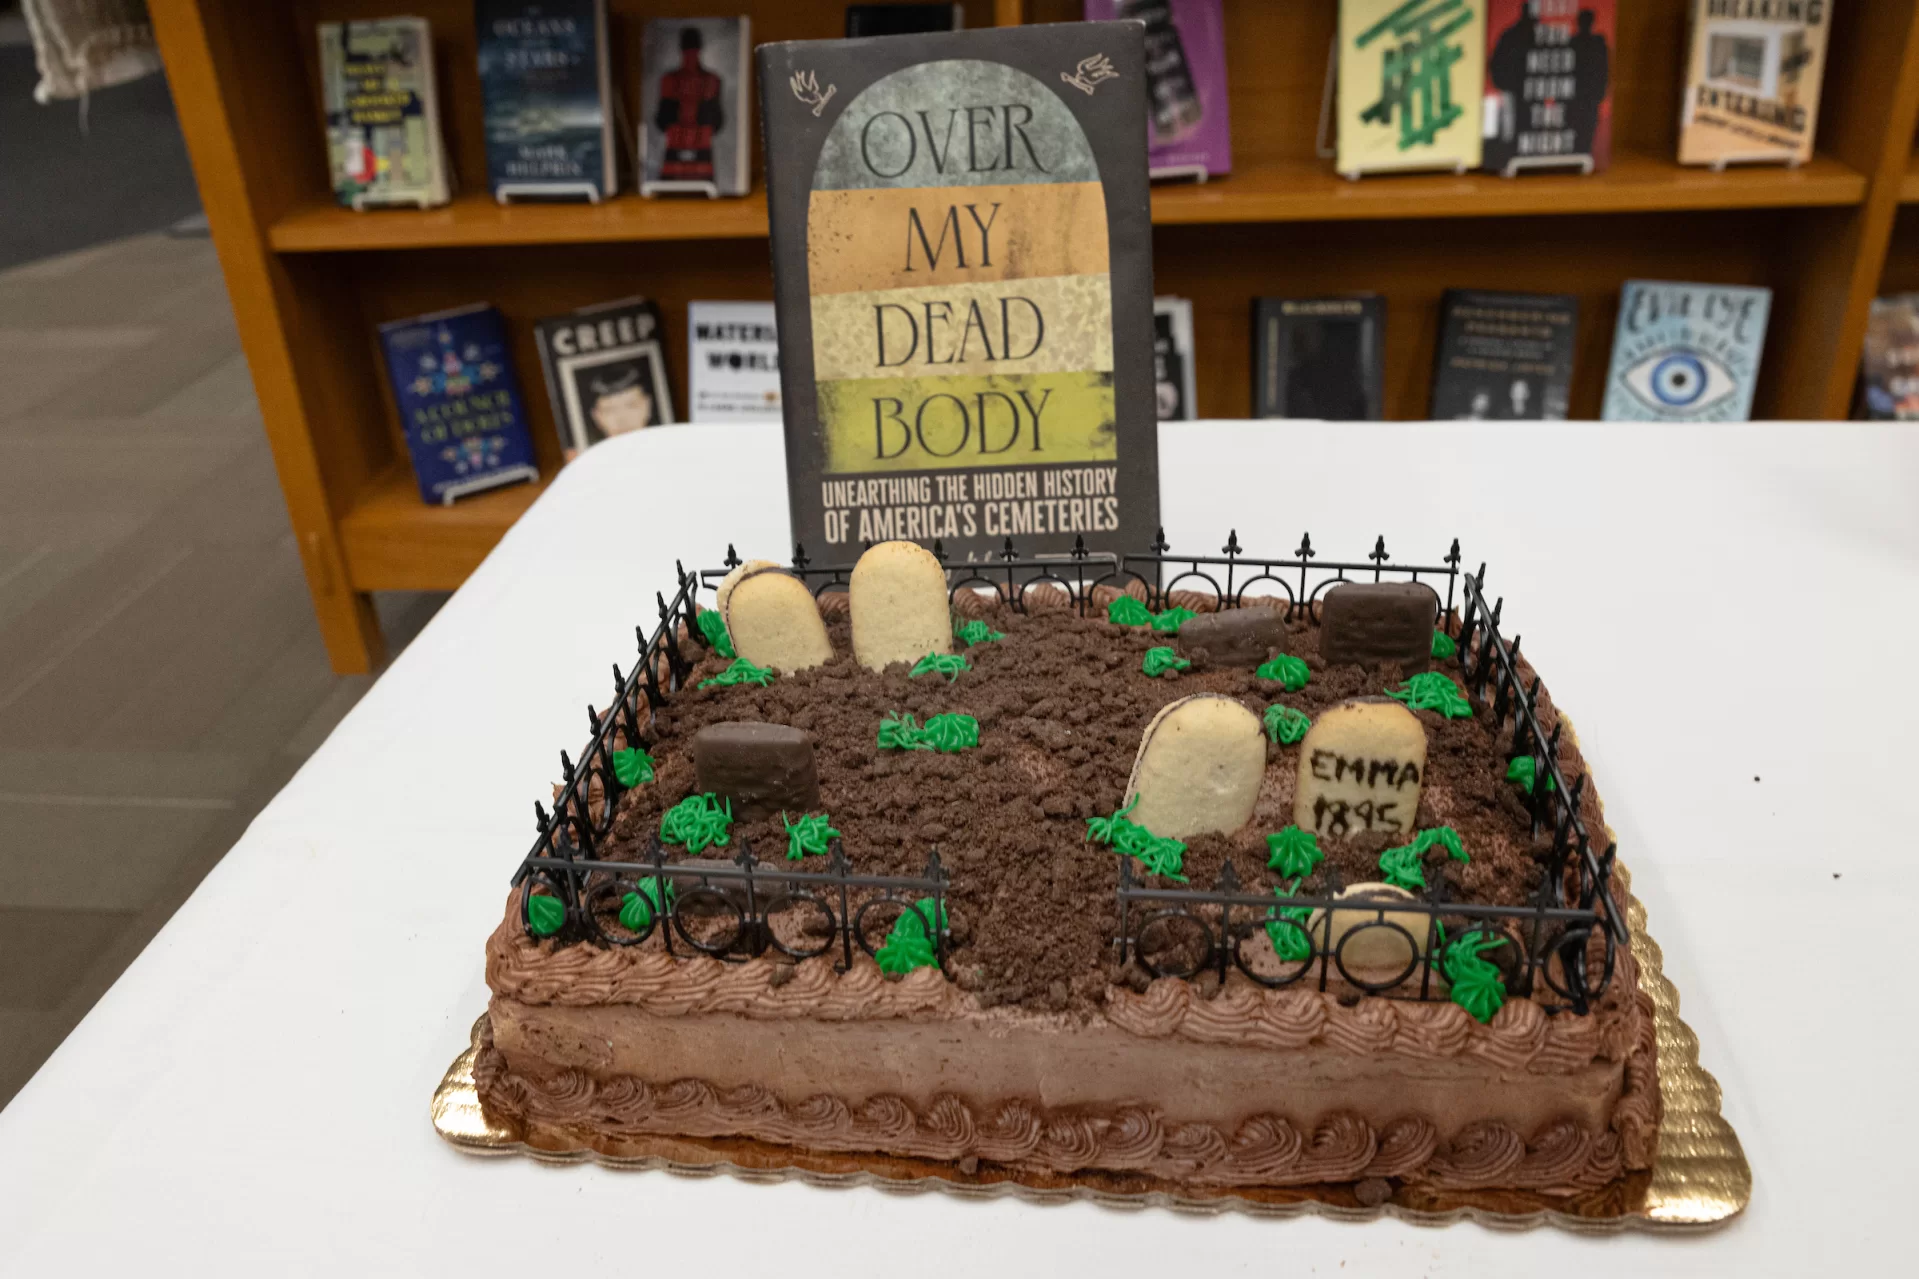 The annual Edible Books Festival is returning to Ladd! It is a day of creativity and deliciousness where participants get to represent a book with a food item they create. It could be a fun play on words, a food item that looks like the cover of a book, or a recipe that captures the essence of a favorite character. There are no rules to limit anyone’s creativity! Submissions will be judged in the categories of flavor and creativity, and the winners will be awarded culinary medallions. The event is being hosted in Ladd Library’s Lobby on Friday, April 12th from 12pm-1pm. Coffee and tea will be provided.